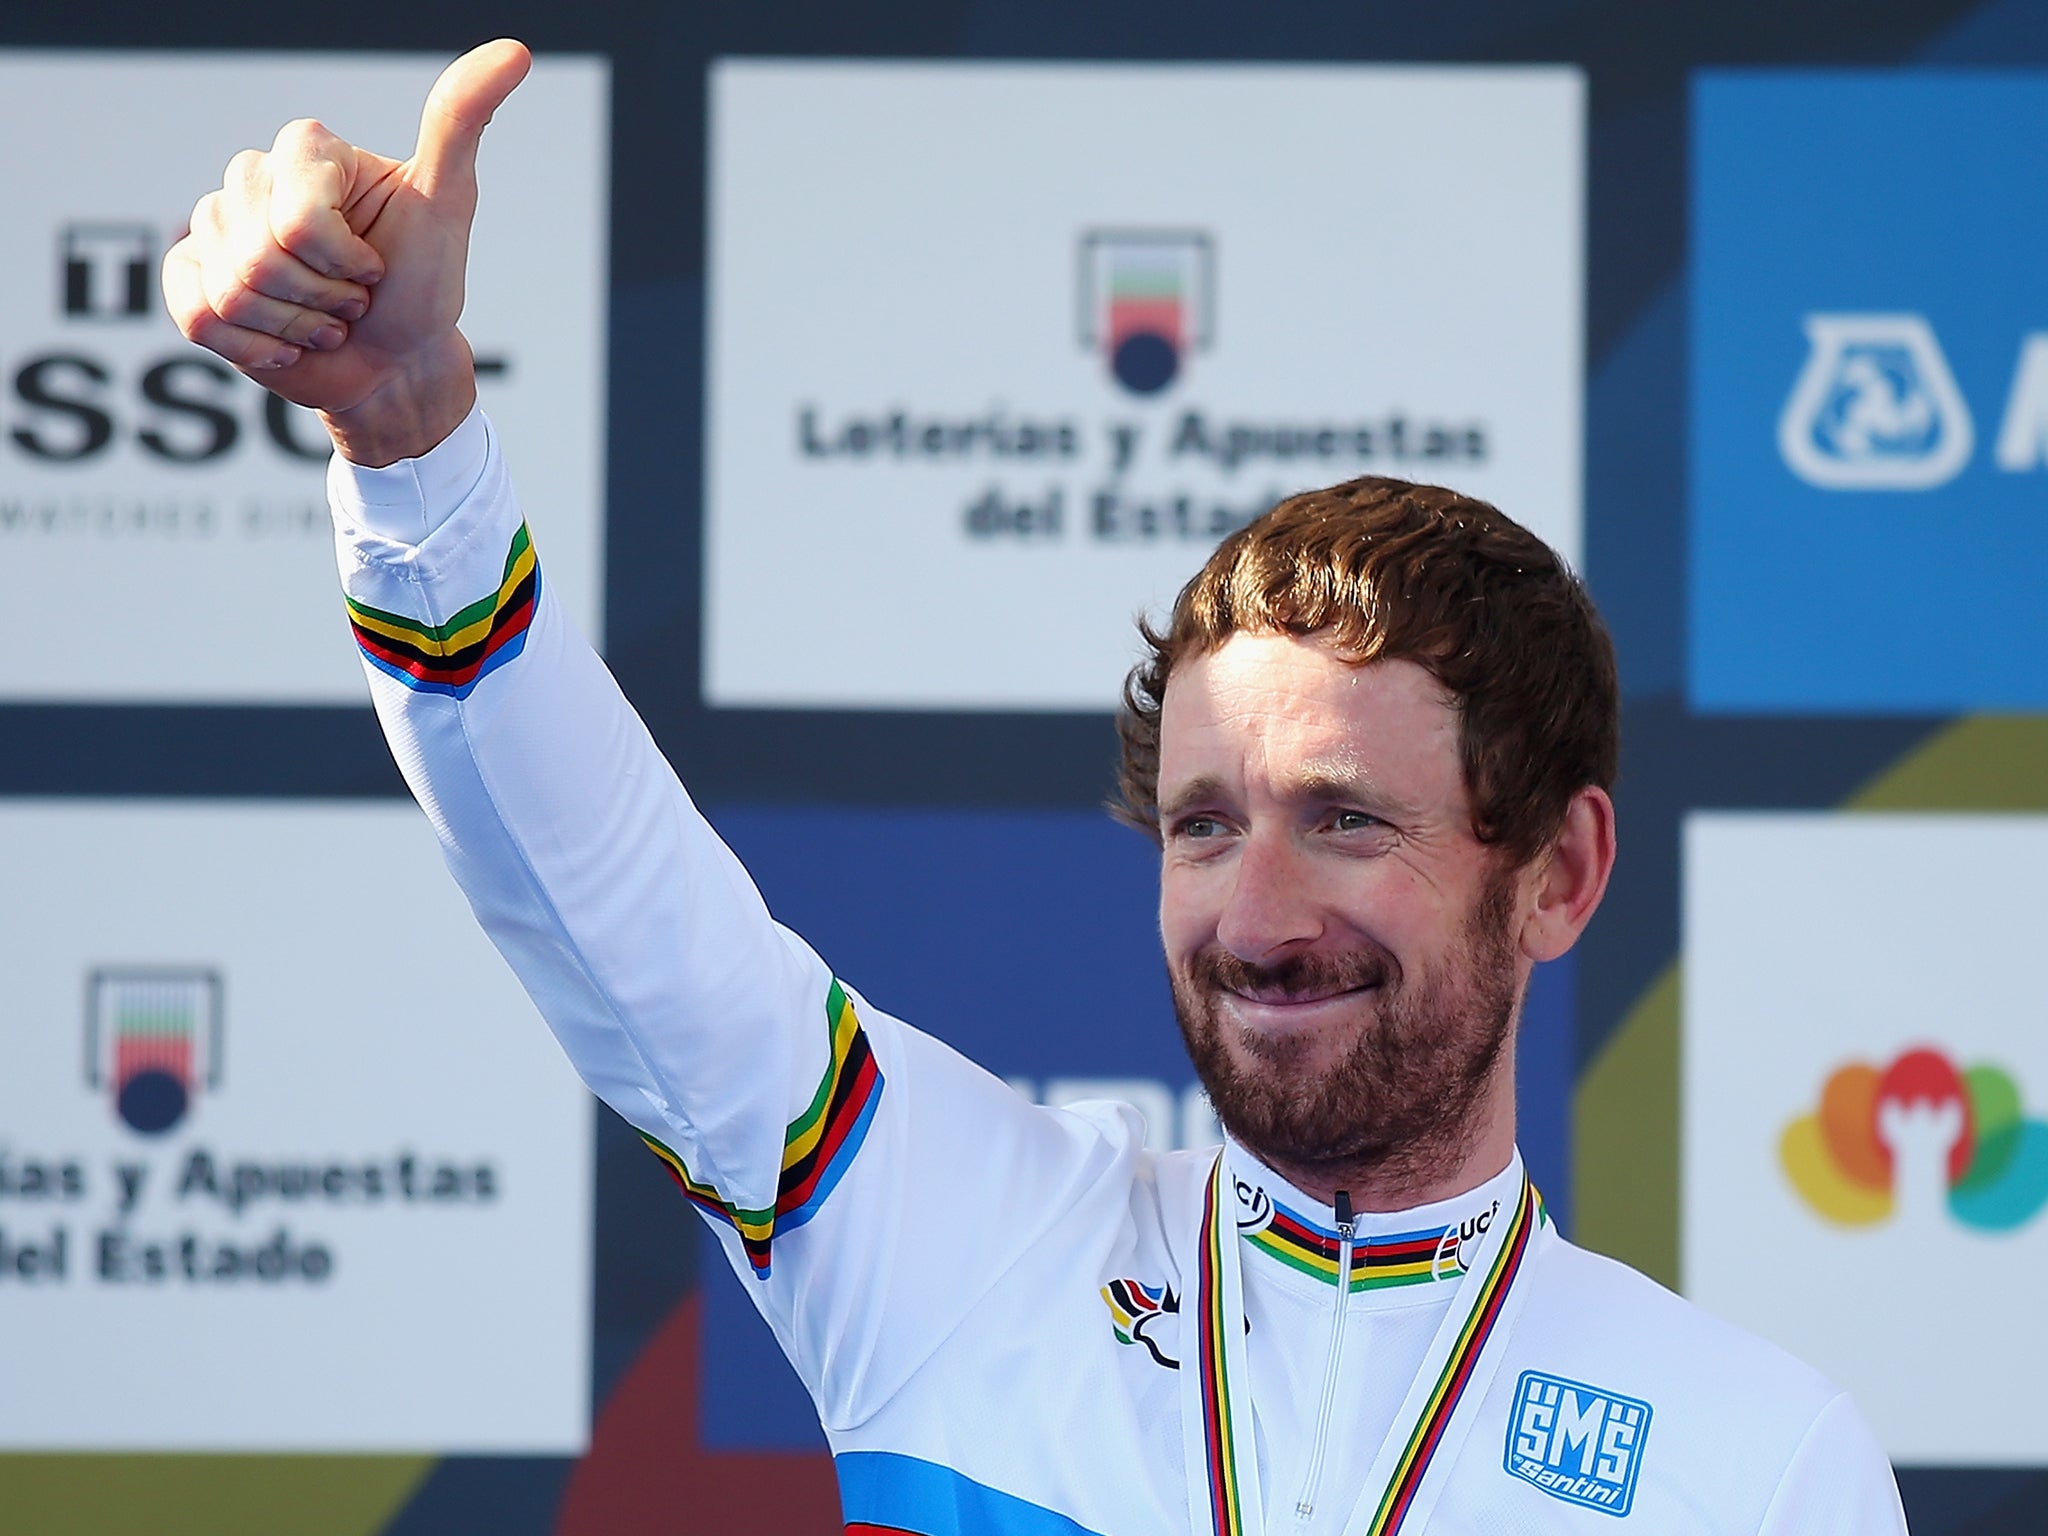 Sir Bradley Wiggins of Great Britain stands on the podium after winning the Elite Men's Individual Time Trial on day four of the UCI Road World Championships